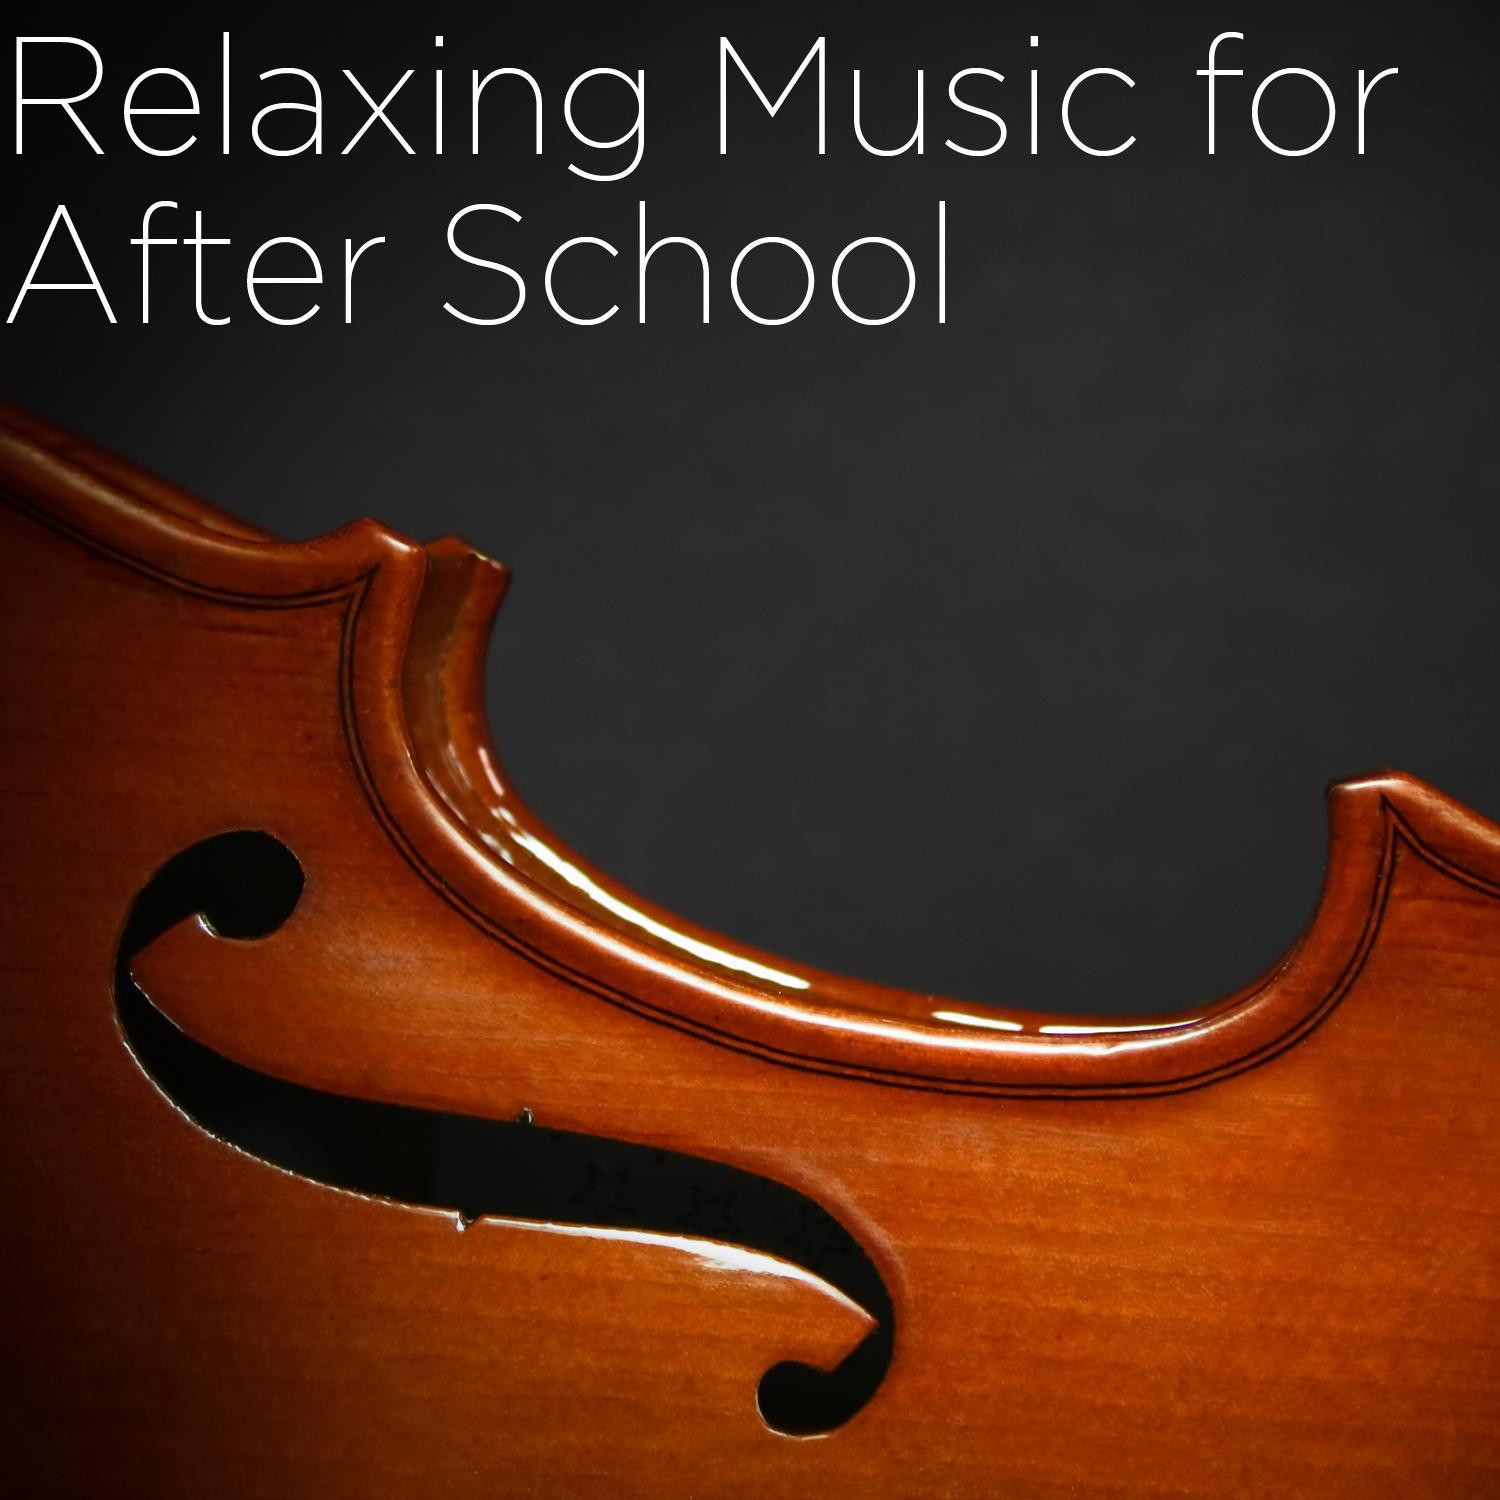 Relaxing Music for After School